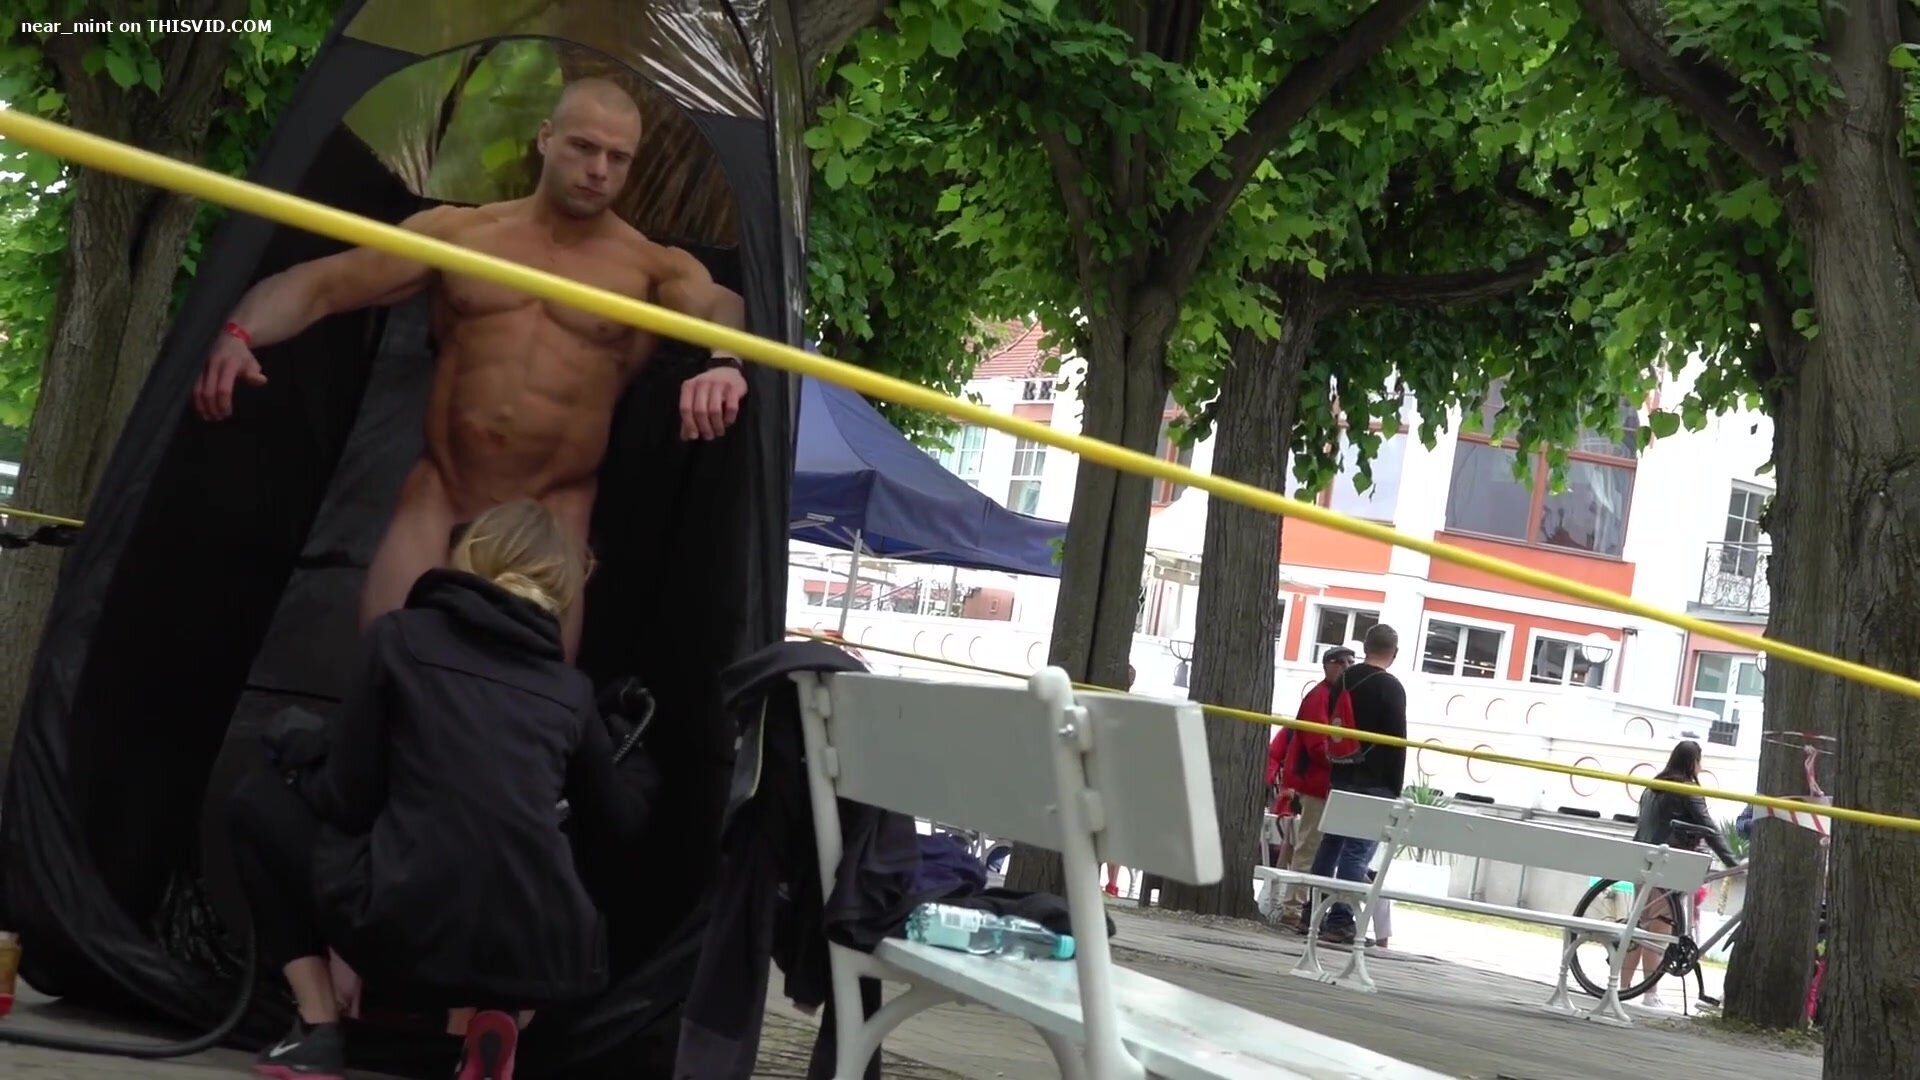 Nude Bodybuilder Caught Spray Tanning Outside